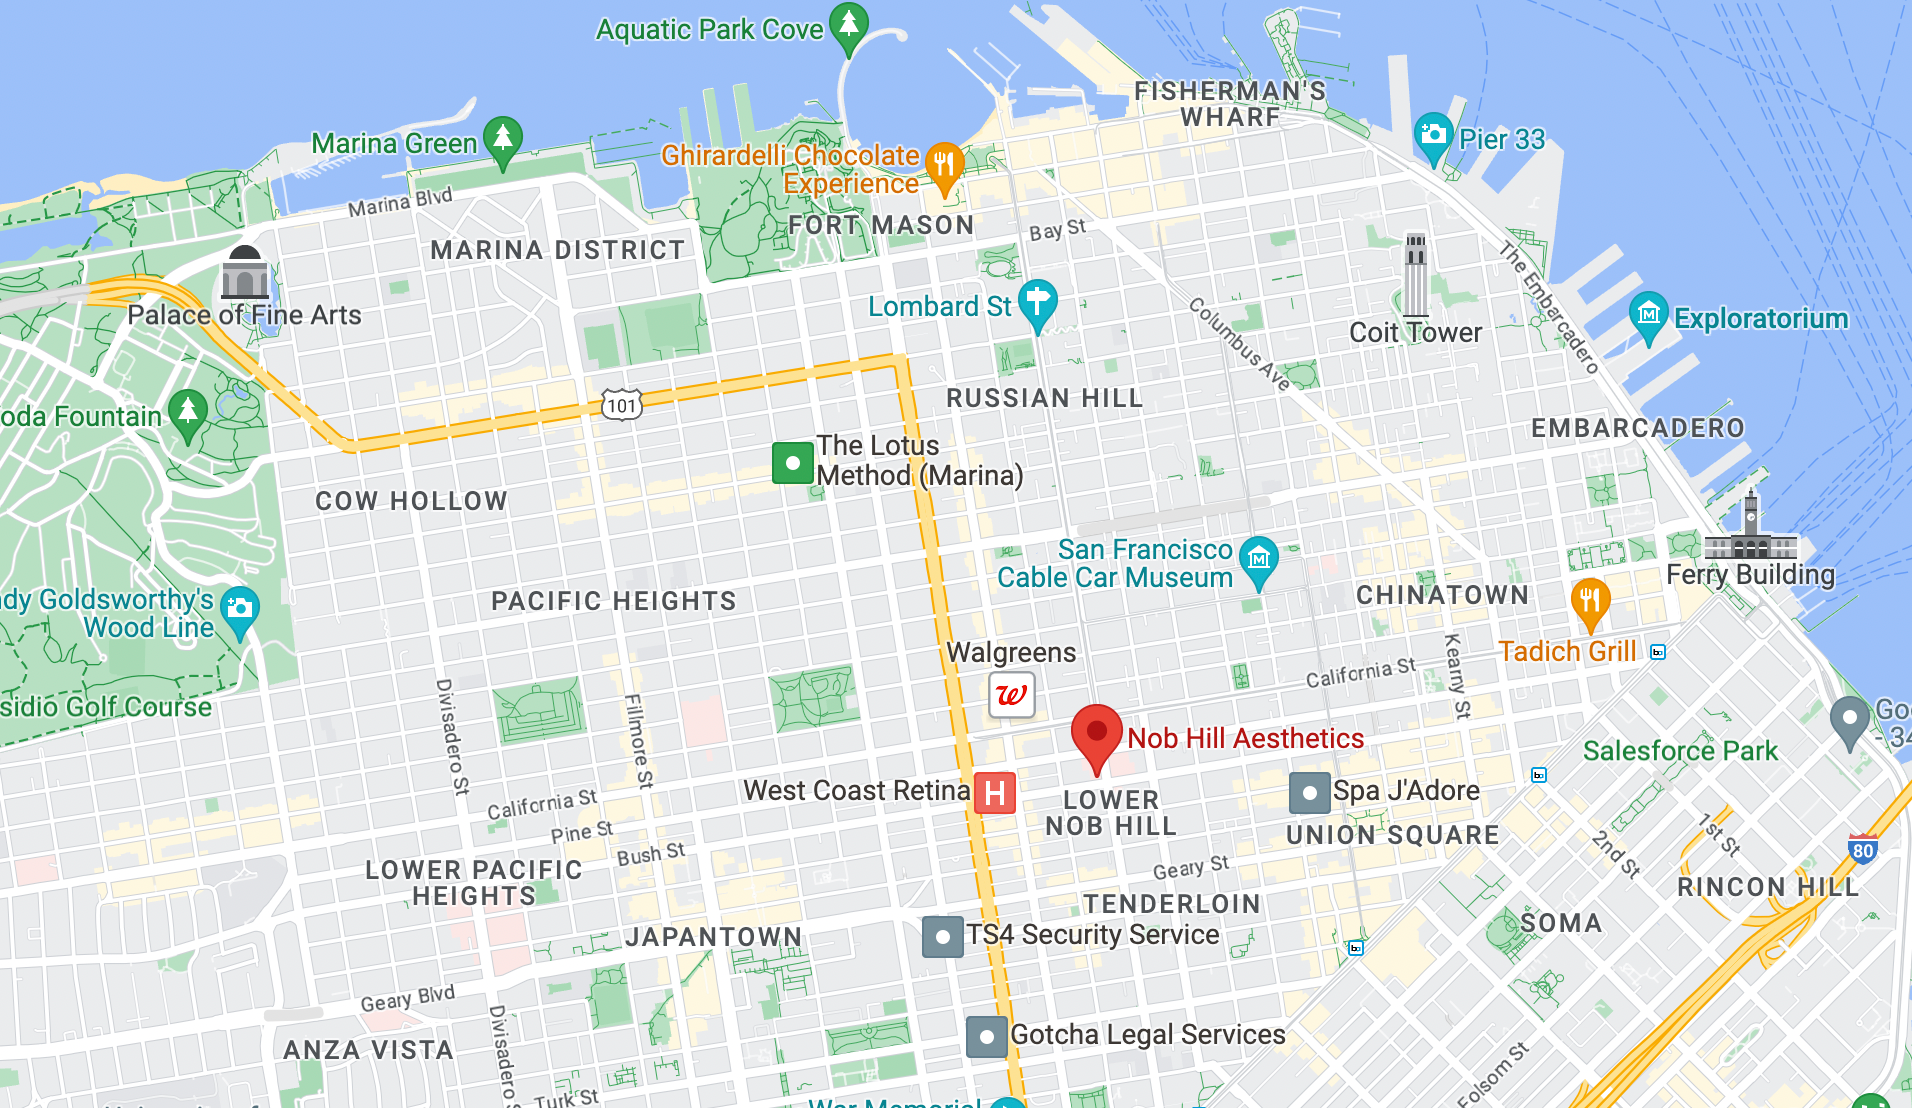 Picture of a map displaying Nob Hill Aesthetics in relation to San Francisco